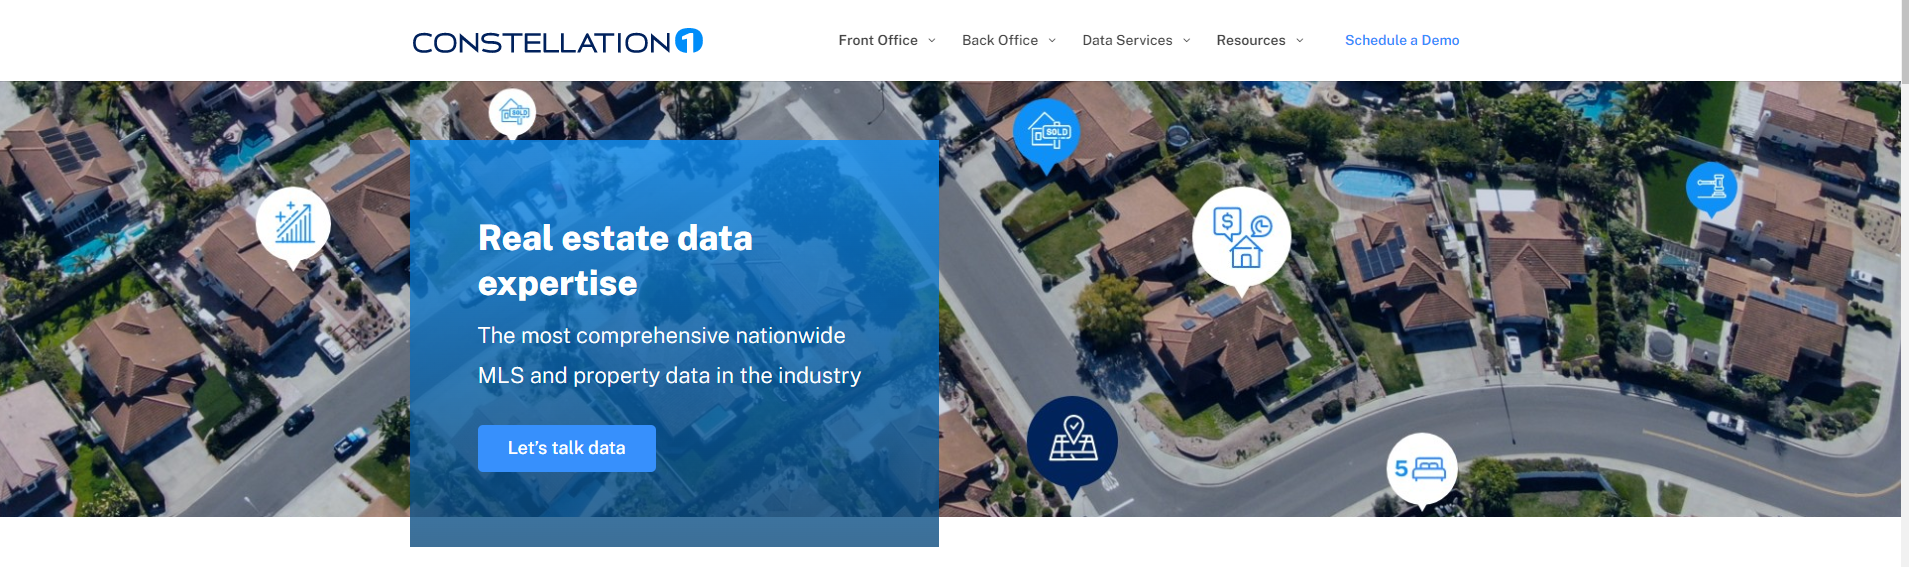 Data Services - Landing Page